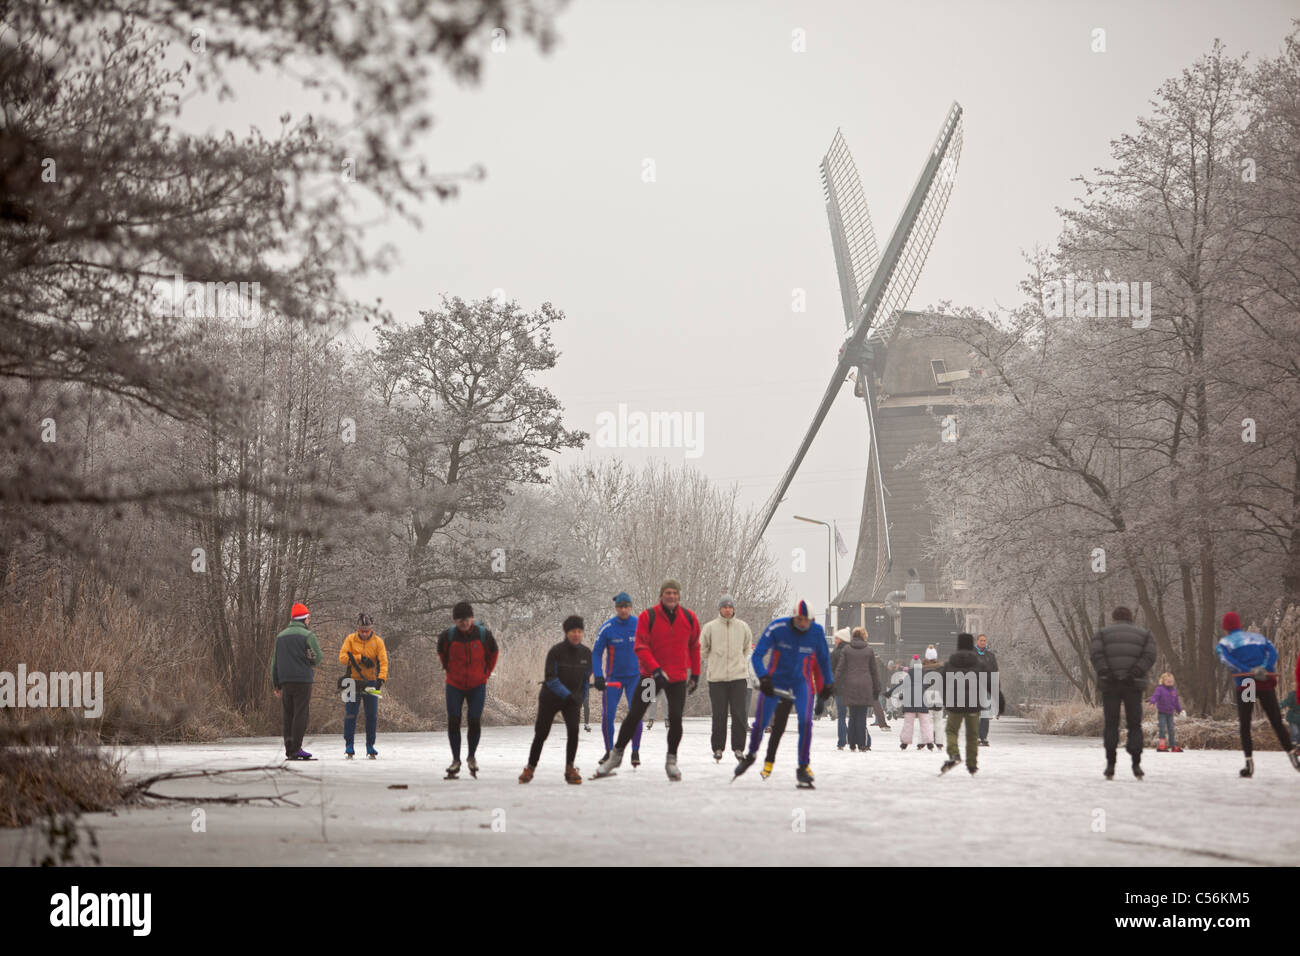 The Netherlands, Ankeveen. People ice skating in front of windmill. Stock Photo